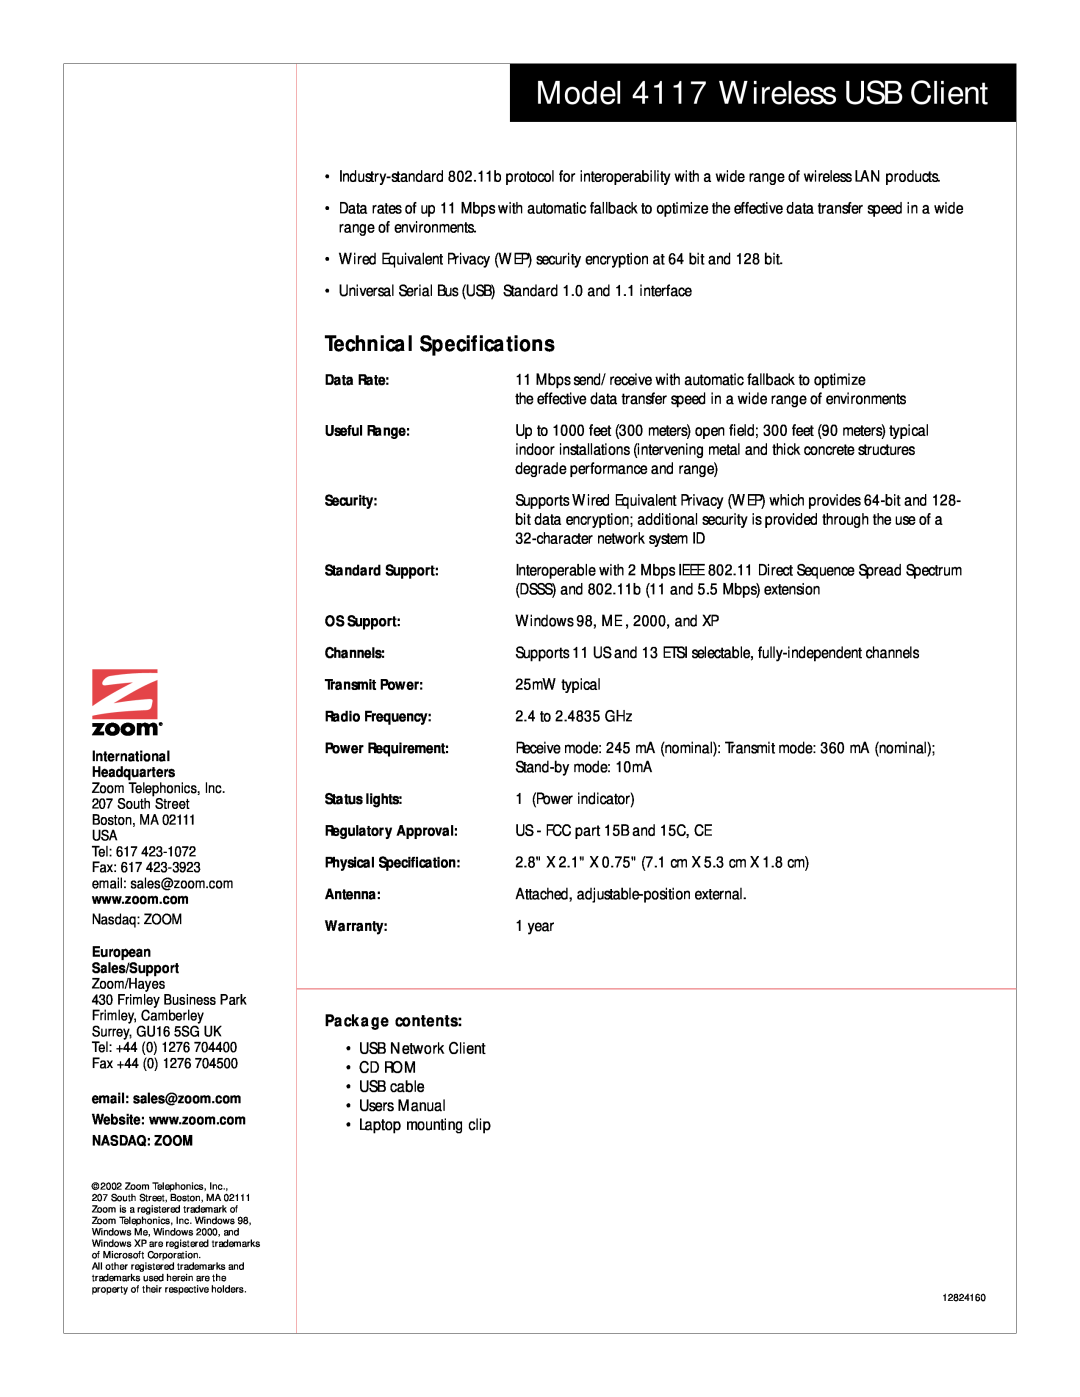 Zoom manual Technical Specifications, Model 4117 Wireless USB Client, Package contents 